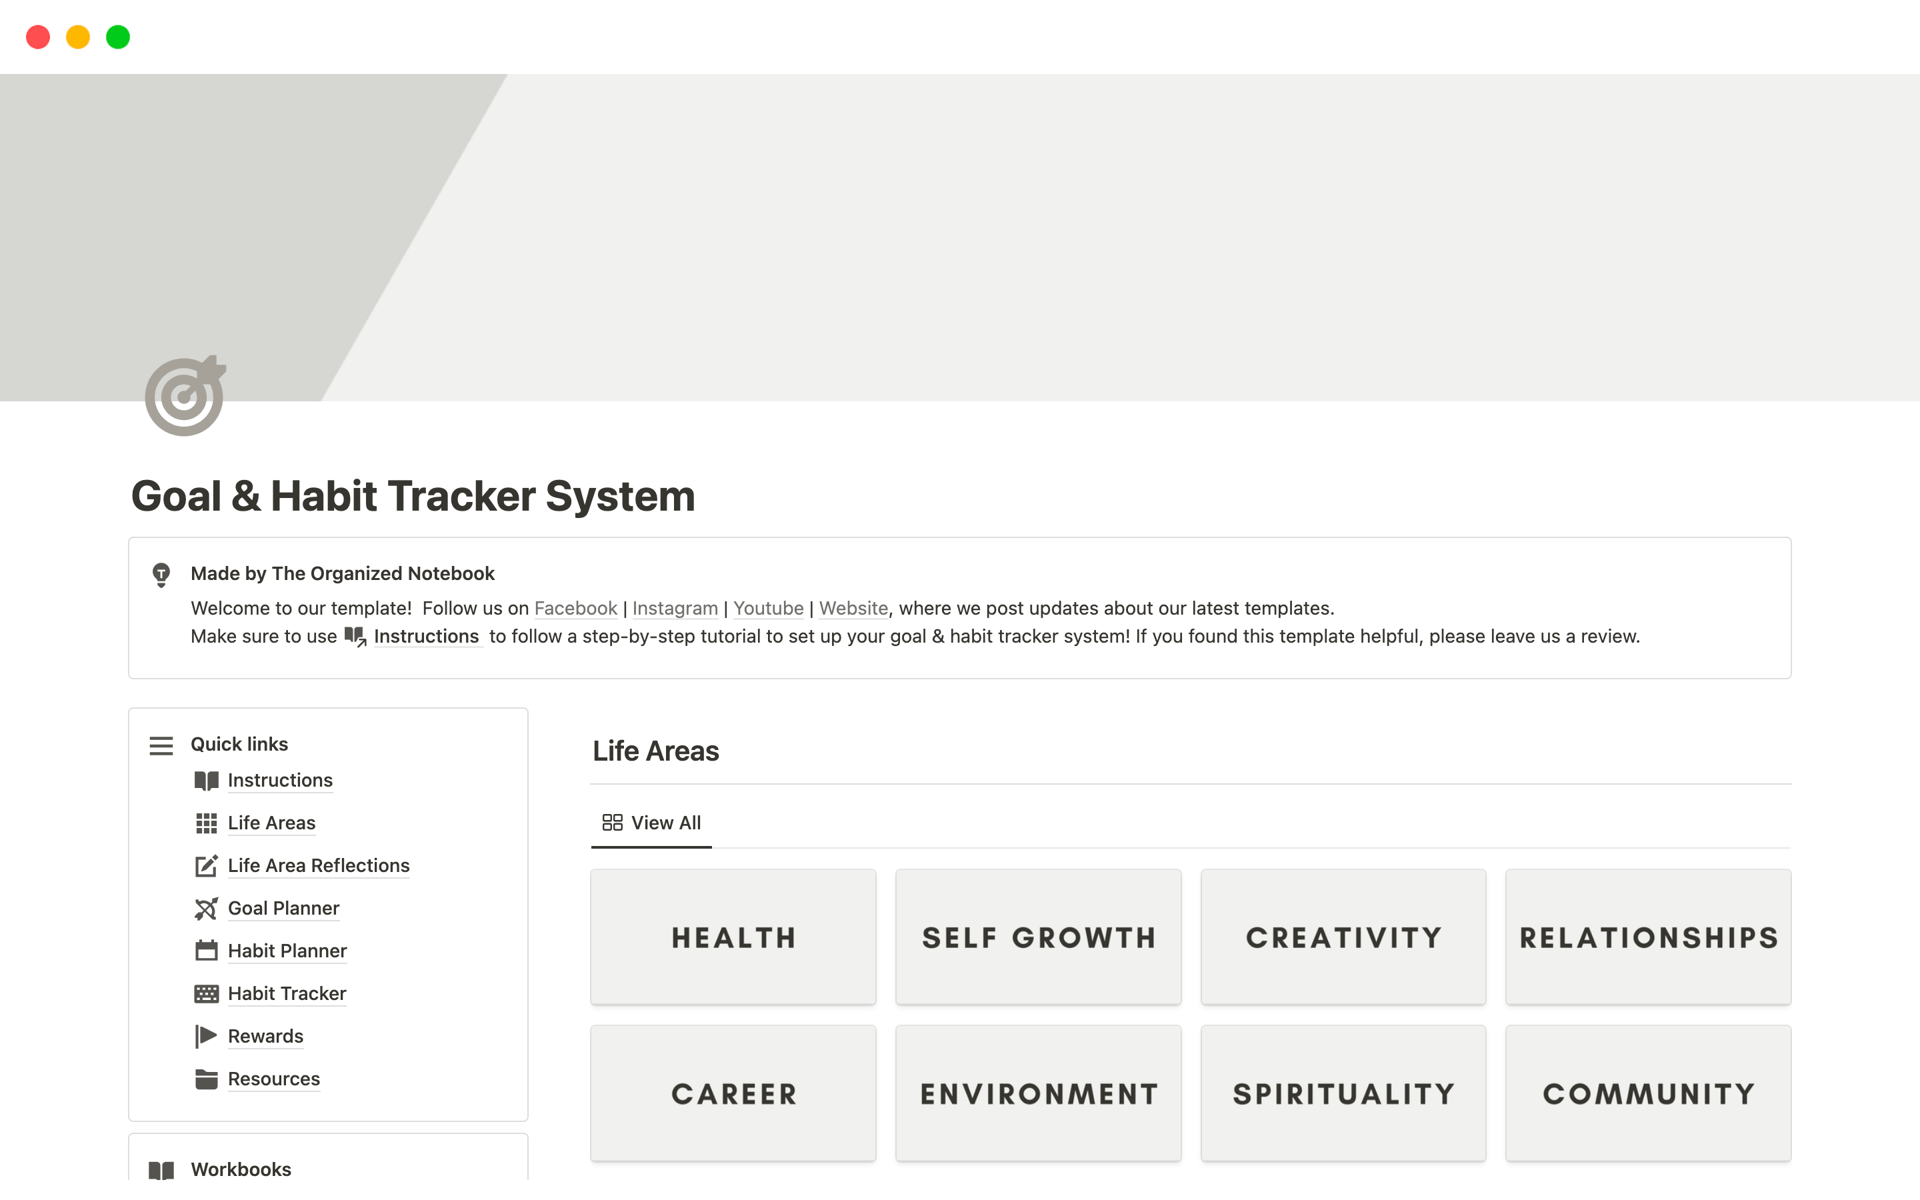 This is an all-in-one solution for tracking and creating habits and goals. We wanted to create a seamless system from your broad life areas (relationships, health, career, etc) and take you through goals and ultimately habit planning and tracking!